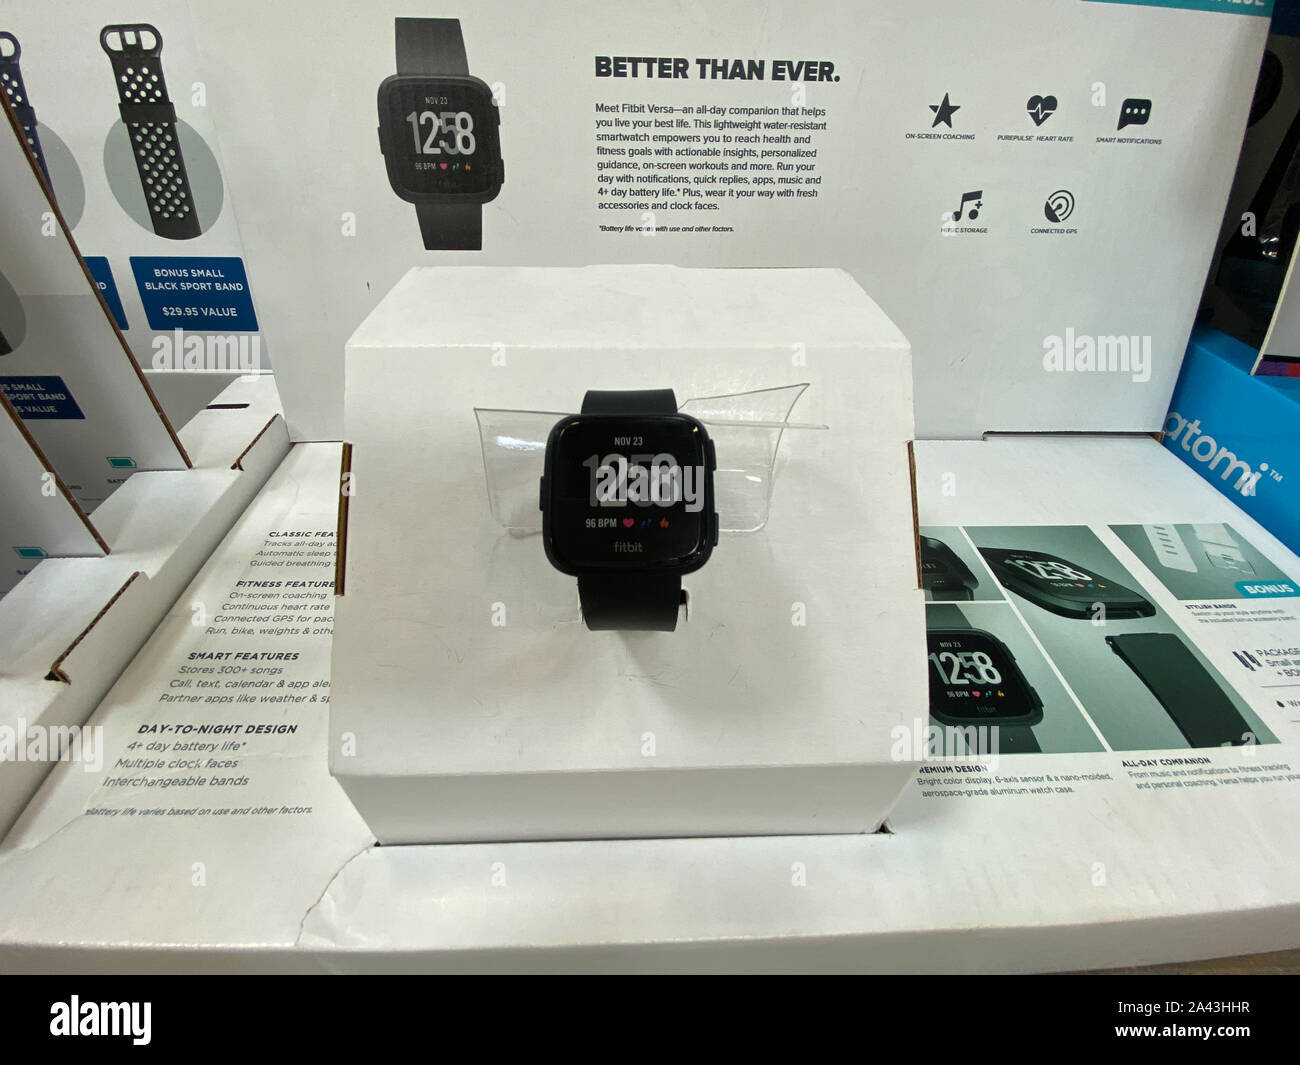 Orlando, FL/USA- 10/11/19: Fitbit fitness tracker watch on display at a Sams Club retail store. Stock Photo